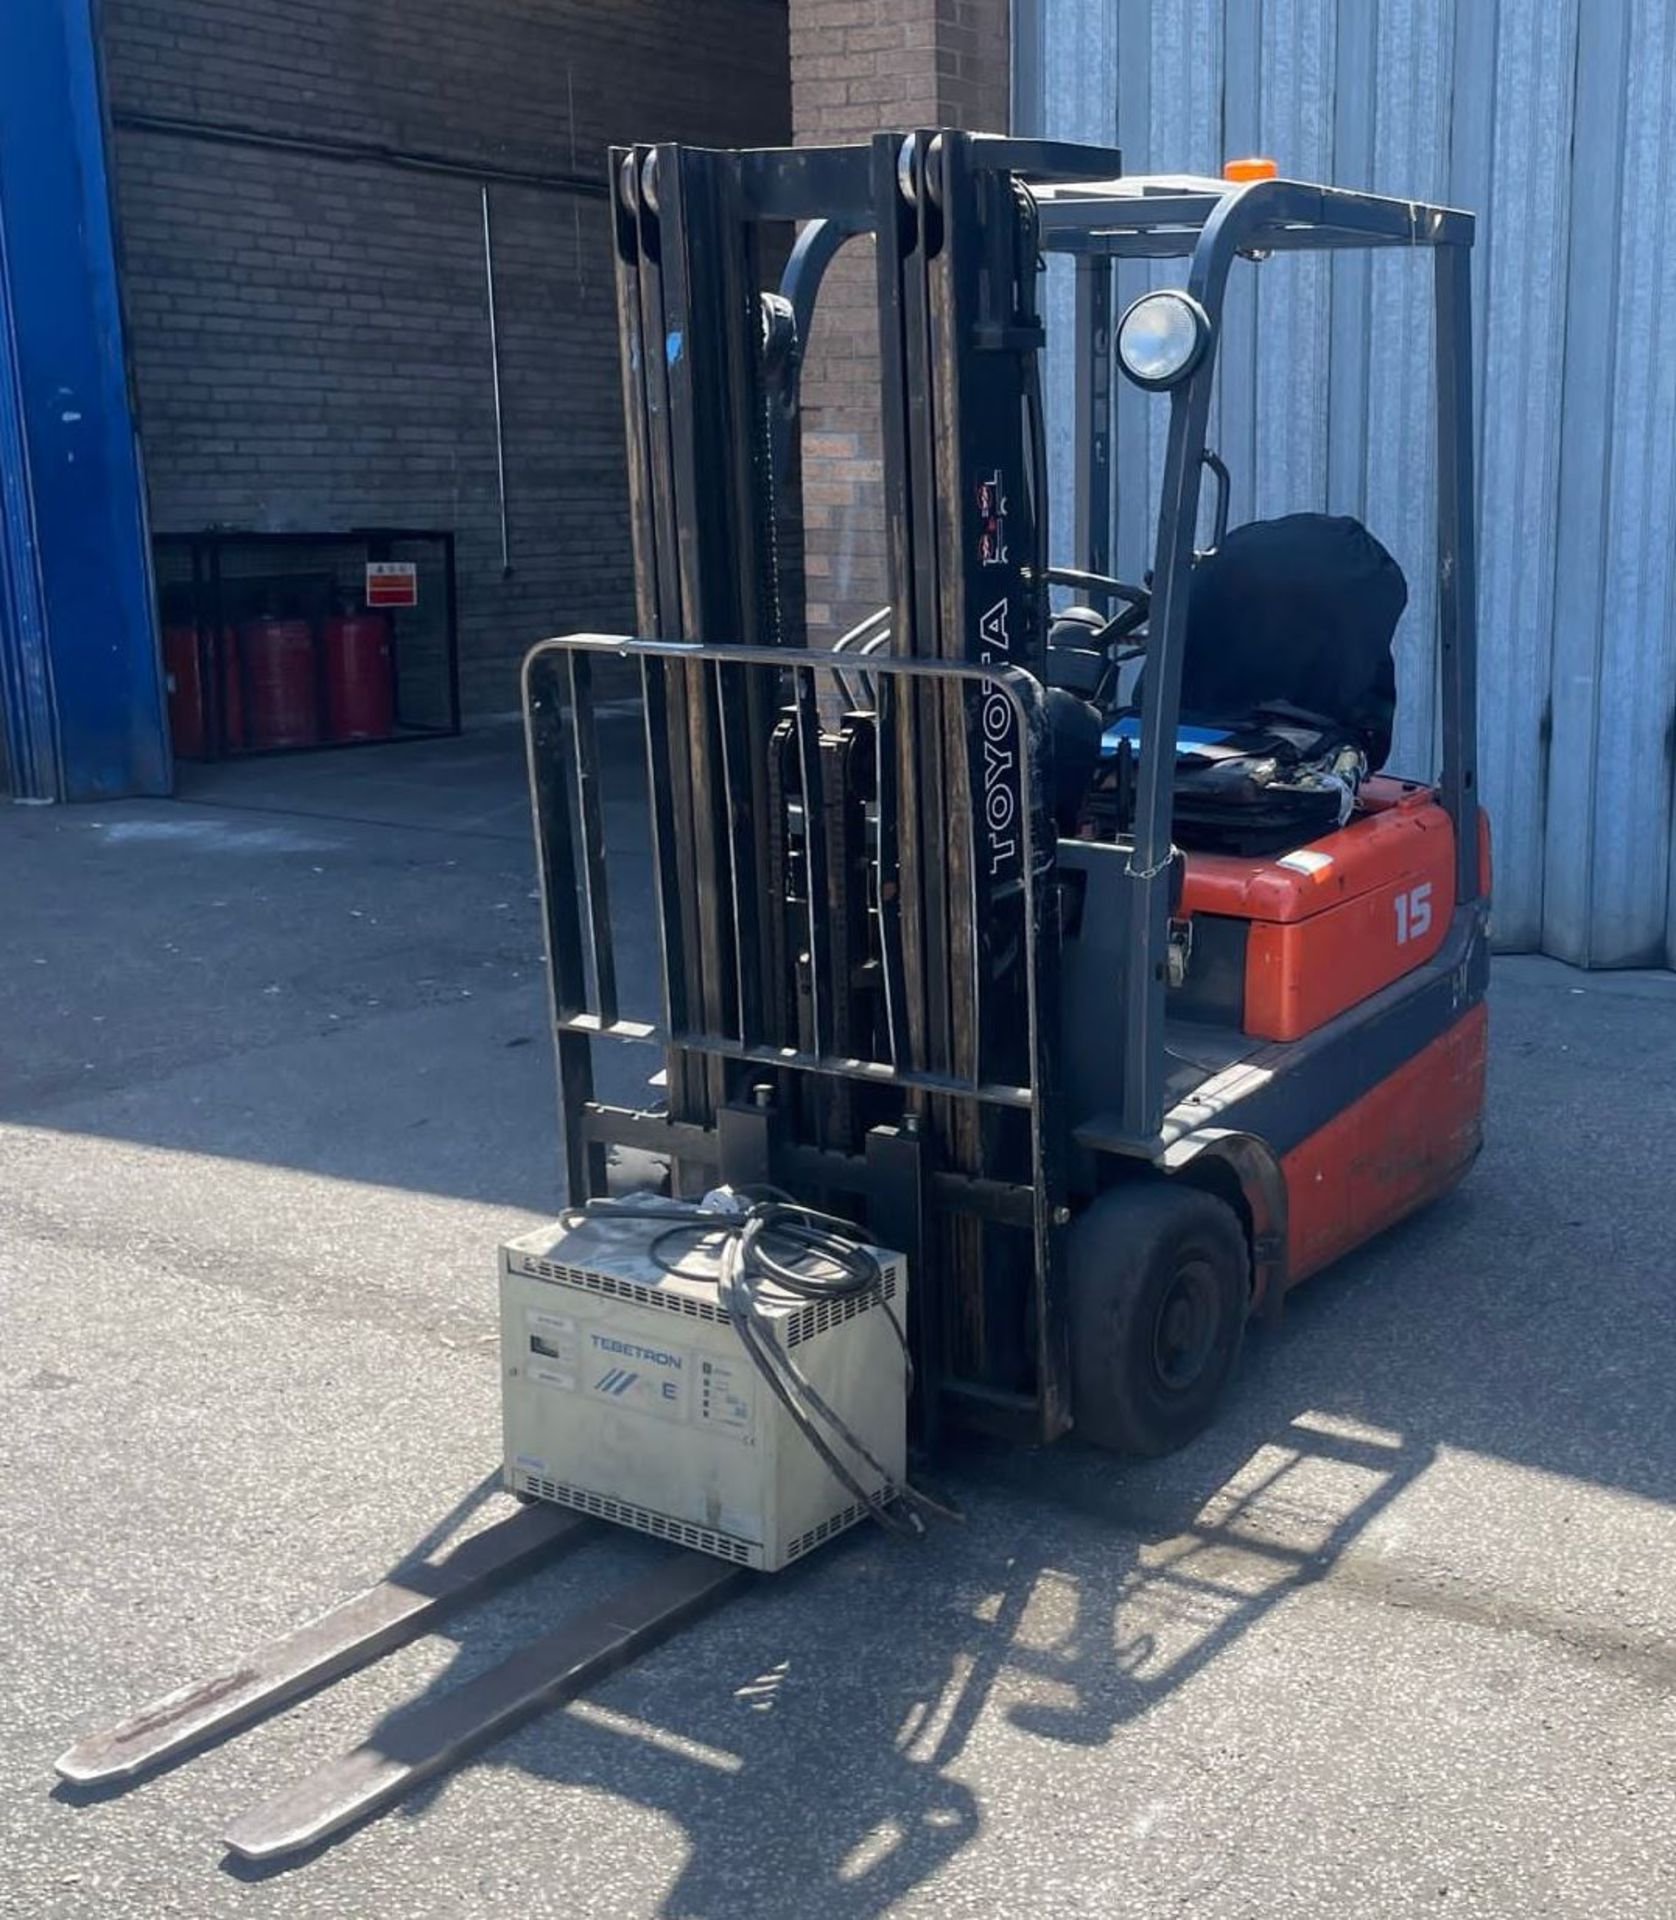 Toyota FBESF15 1.5t Electric Forklift Truck w/ Tebetron E Charger | YOM: 1997 | 6,409 Hours - Image 3 of 12